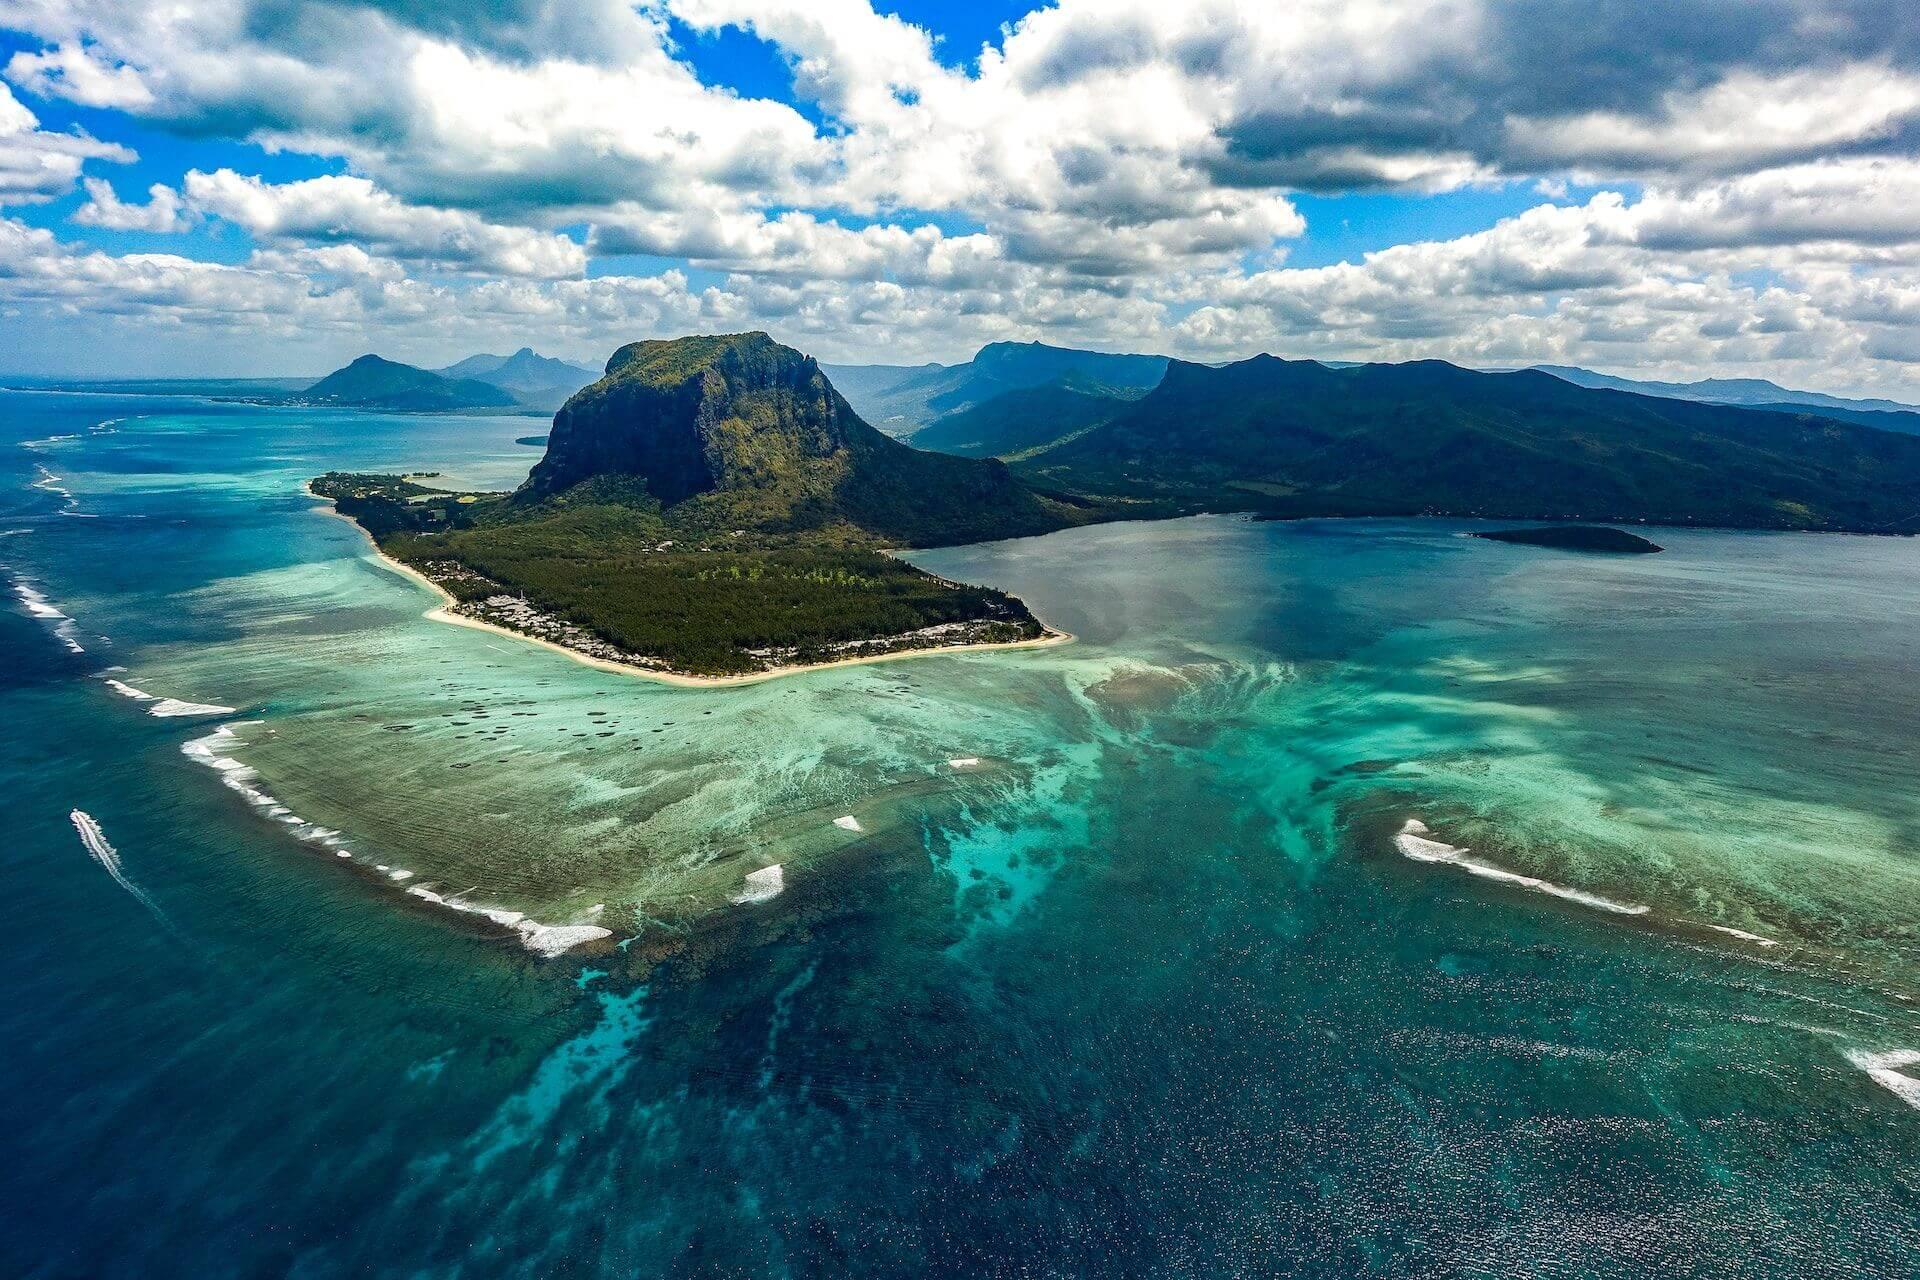 View of the island of Mauritius